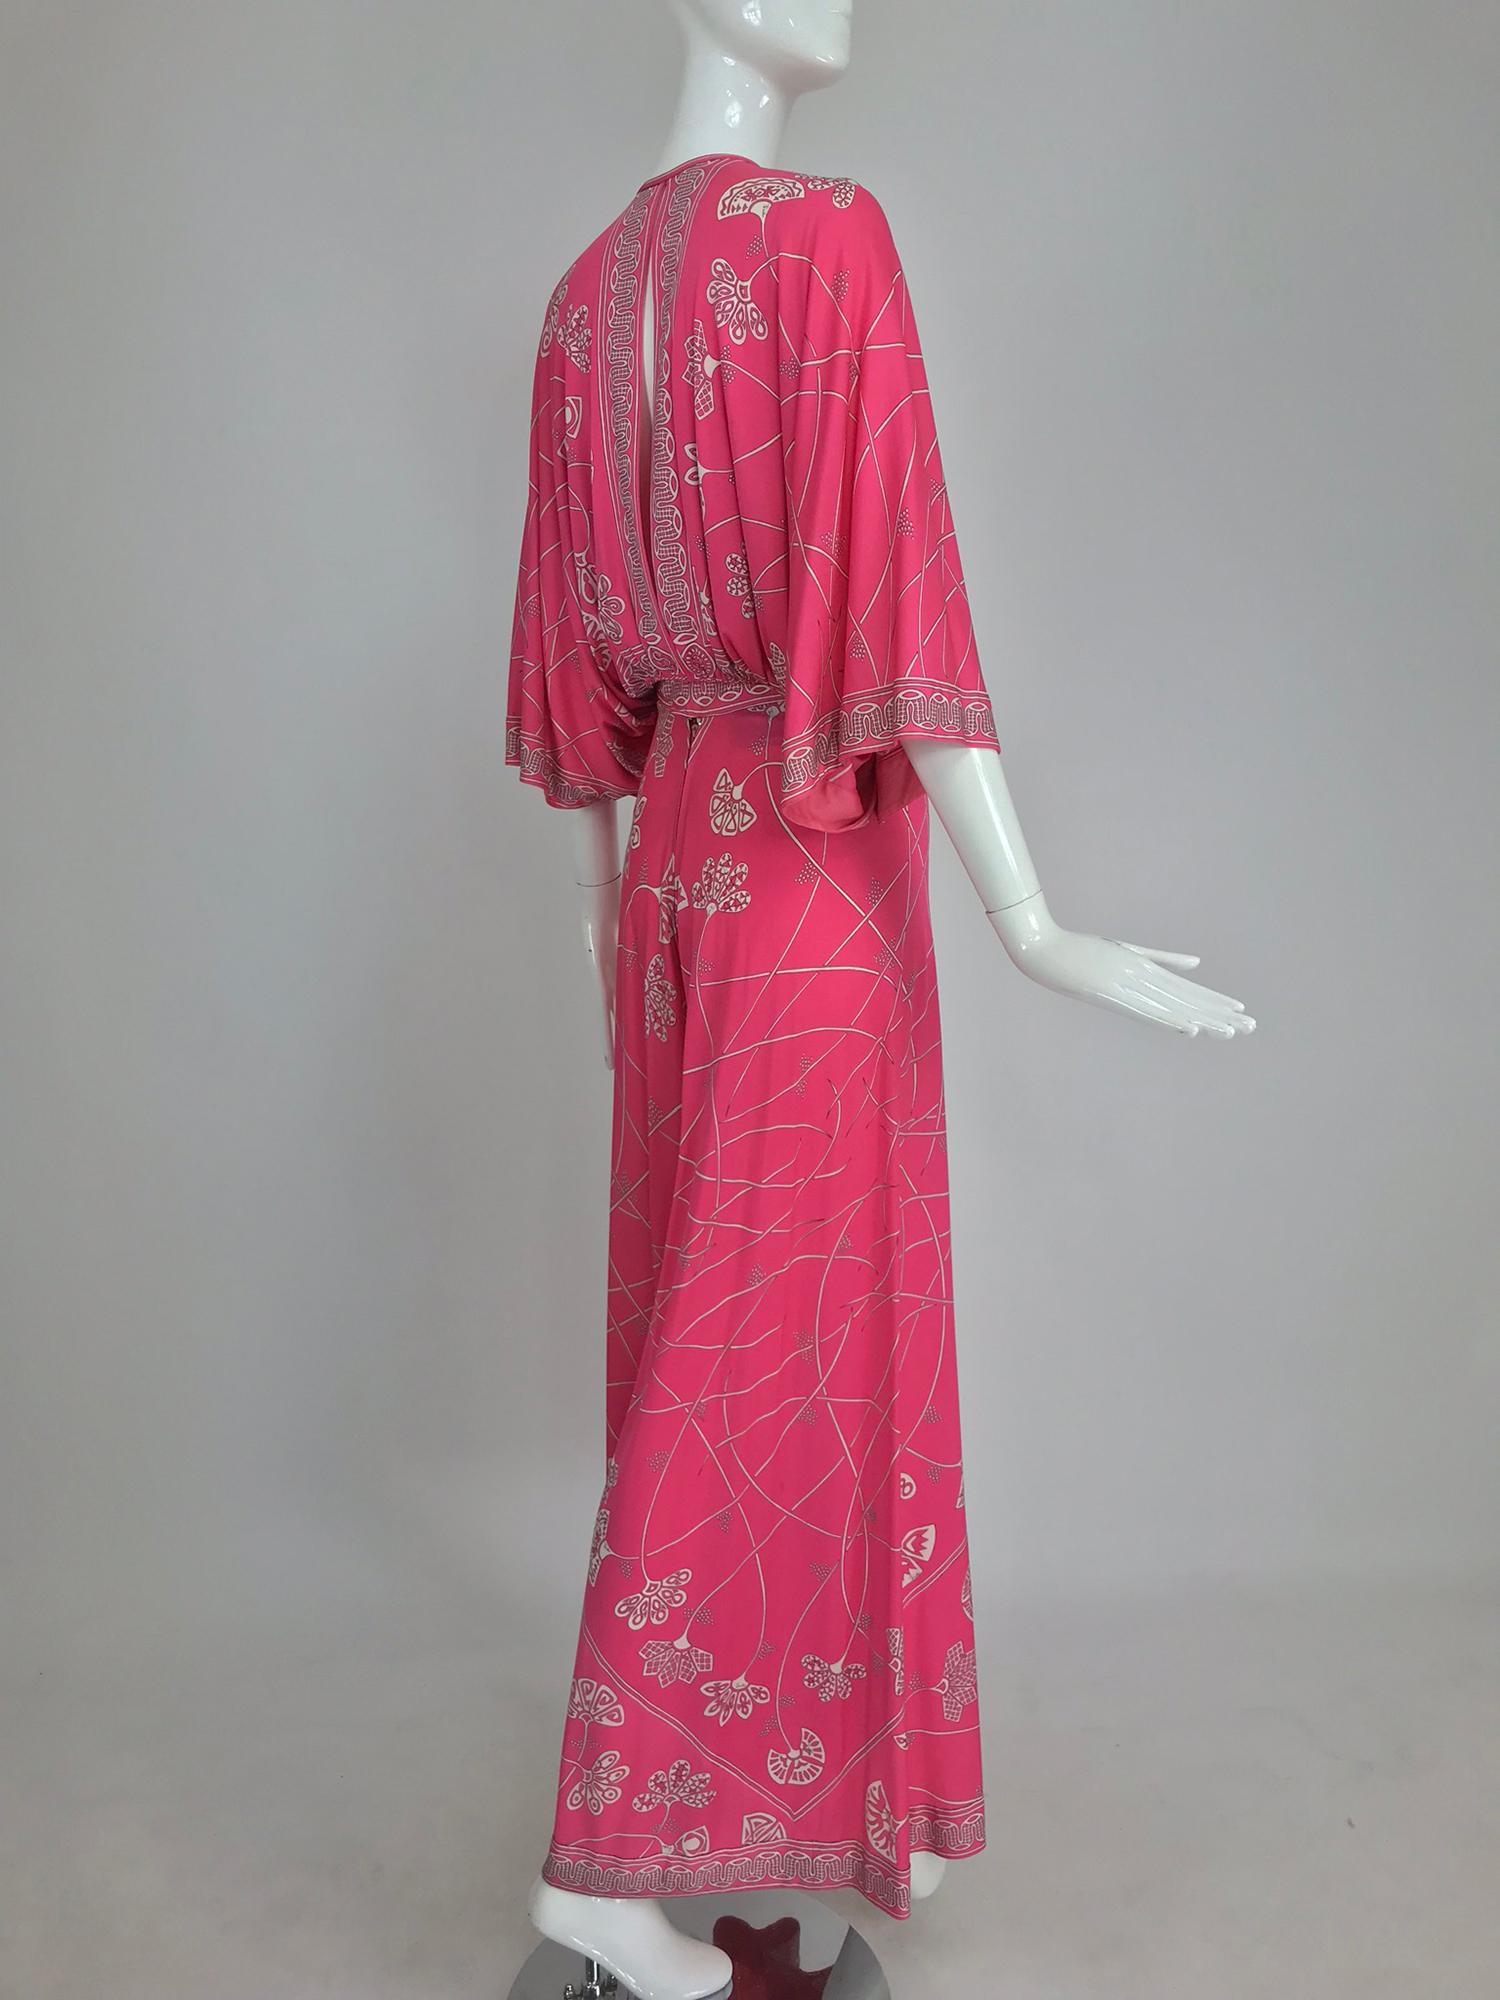 Emilio Pucci silk jersey plunge top and palazzo trousers, 1970s 4